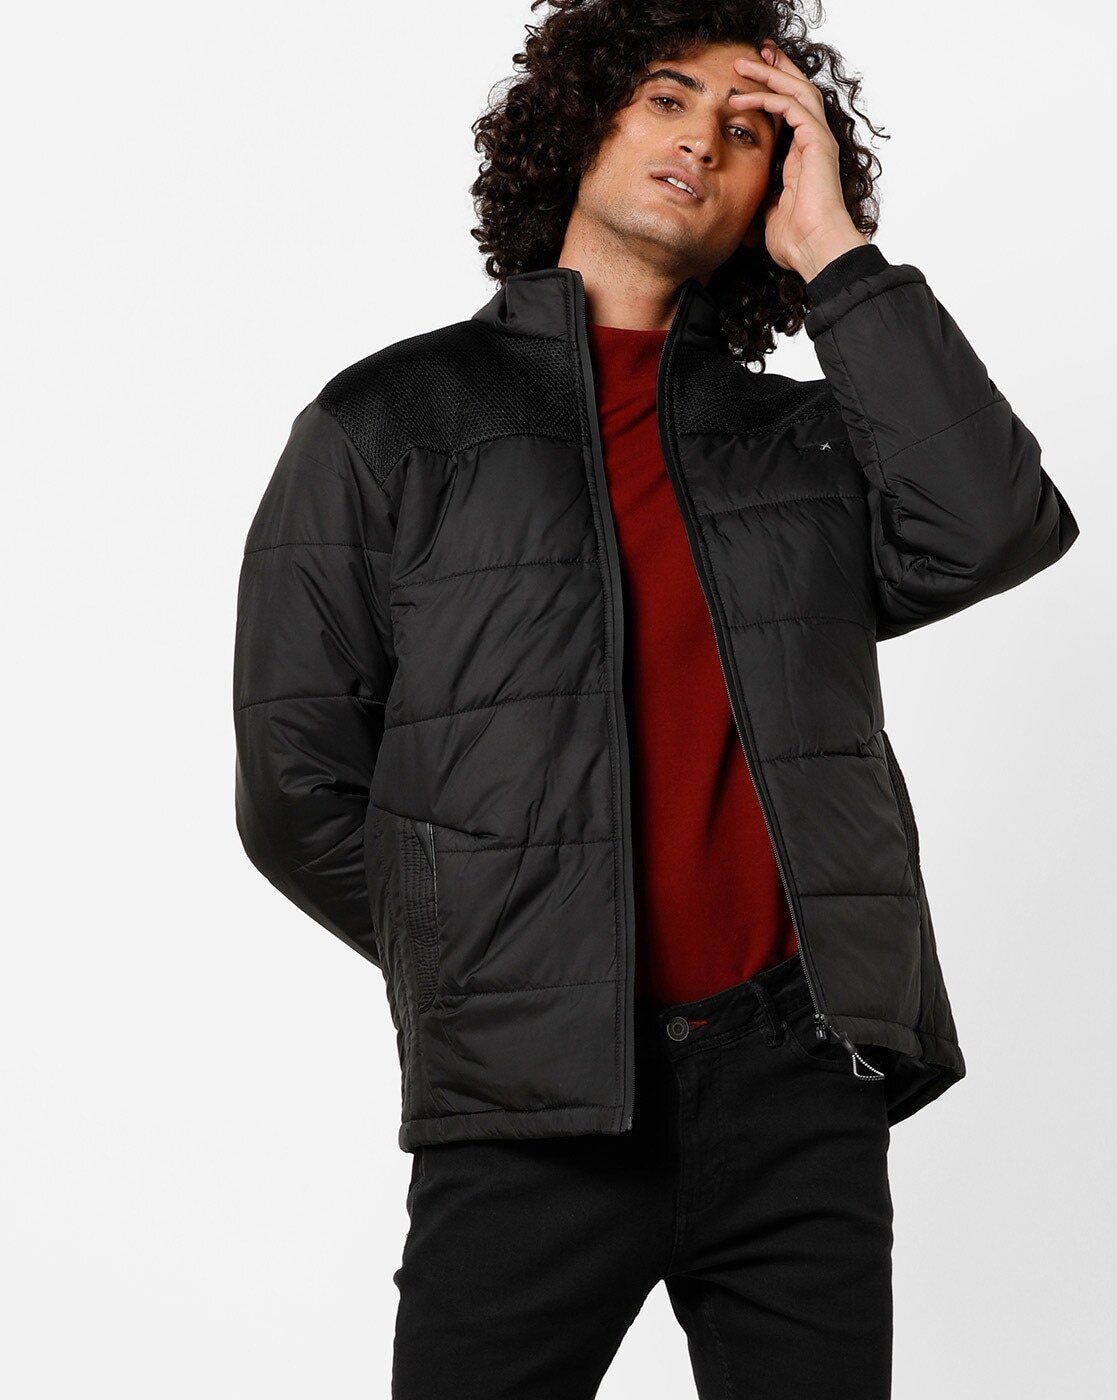 FORT COLLINS Panelled Bomber Jacket with Insert Pockets-14722-AJ - Discount Store